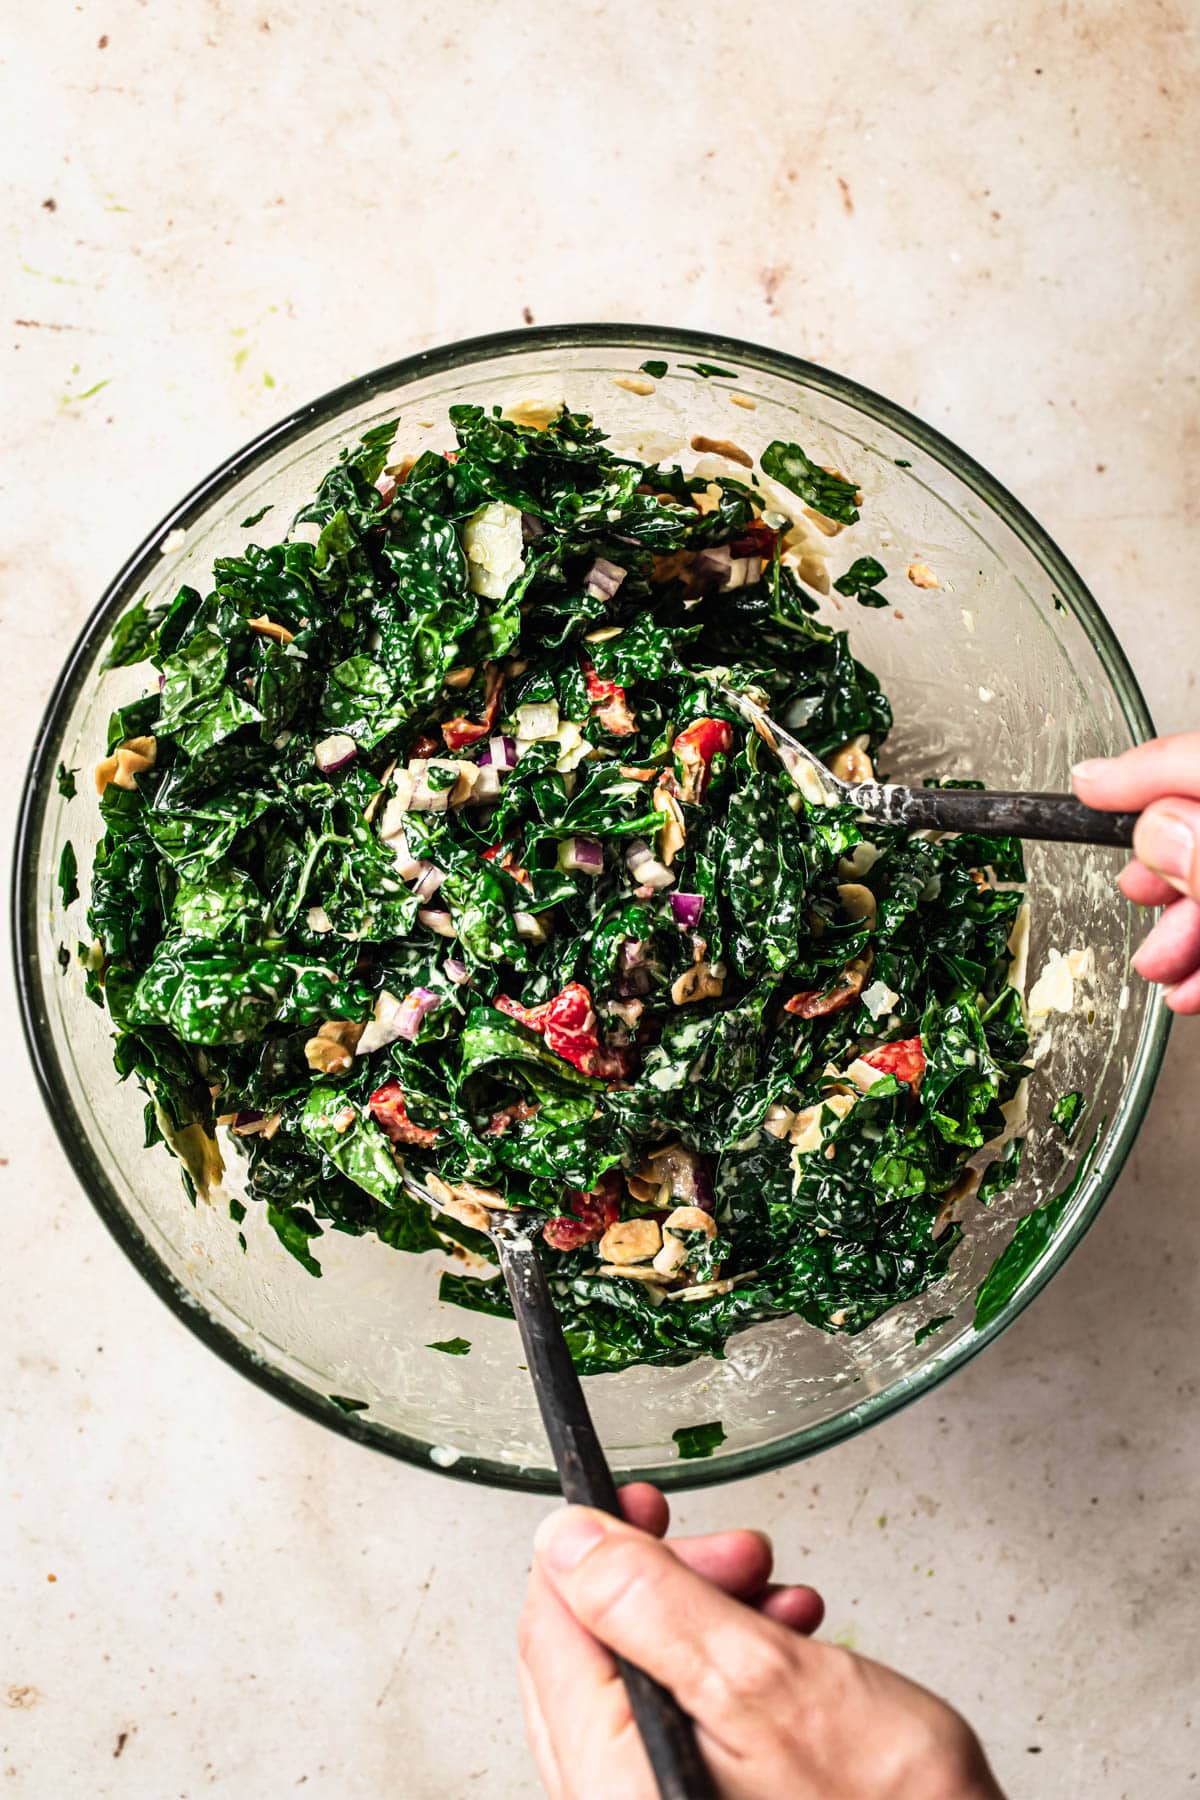 Kale salad with tahini dressing being tossed in a large glass mixing bowl.